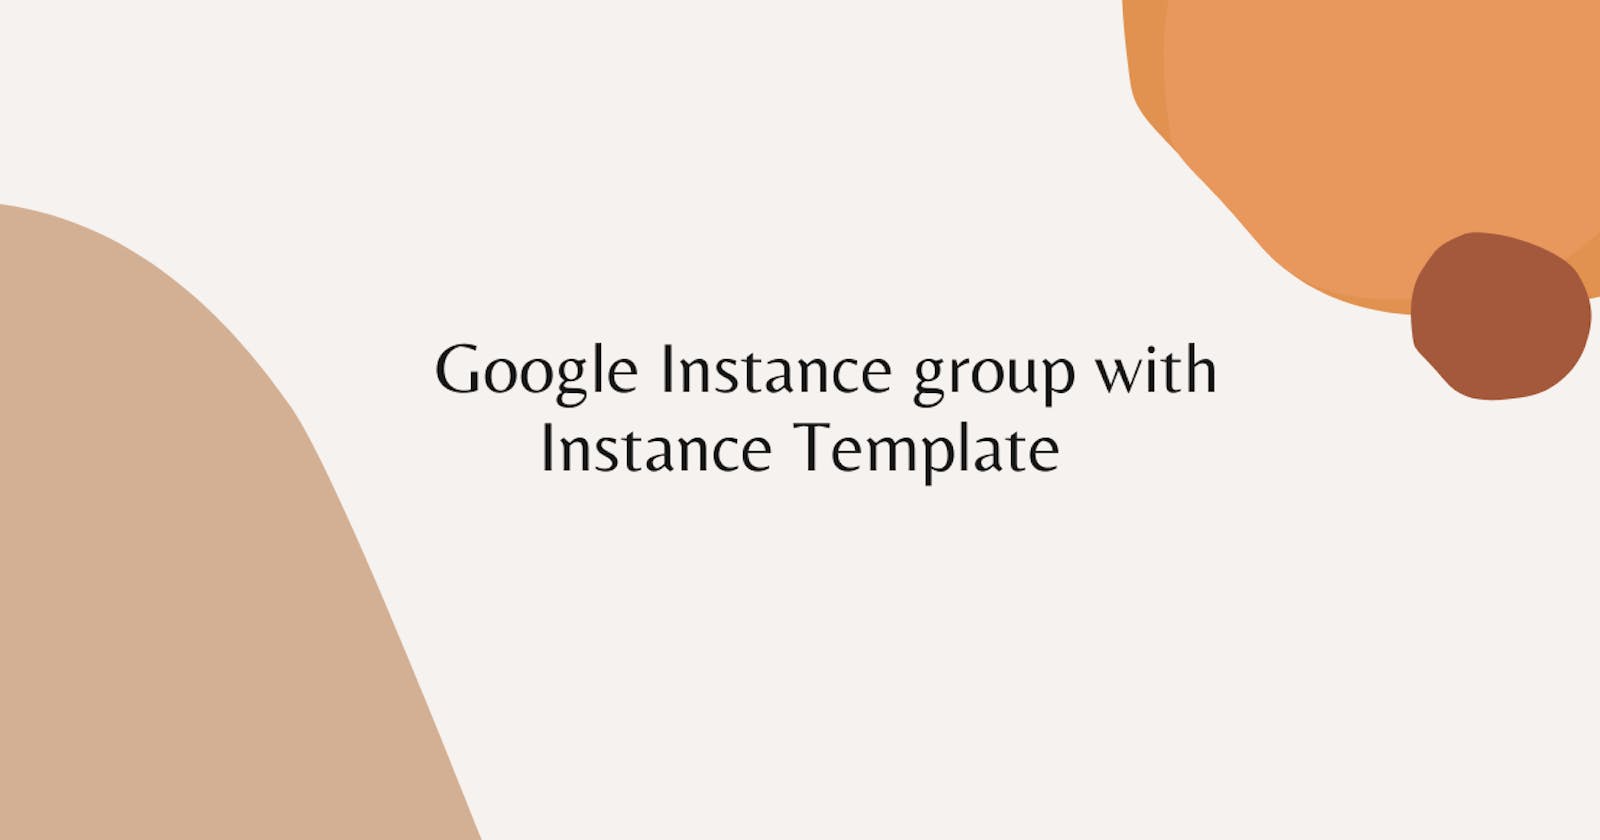 Google Instance group with Instance Template